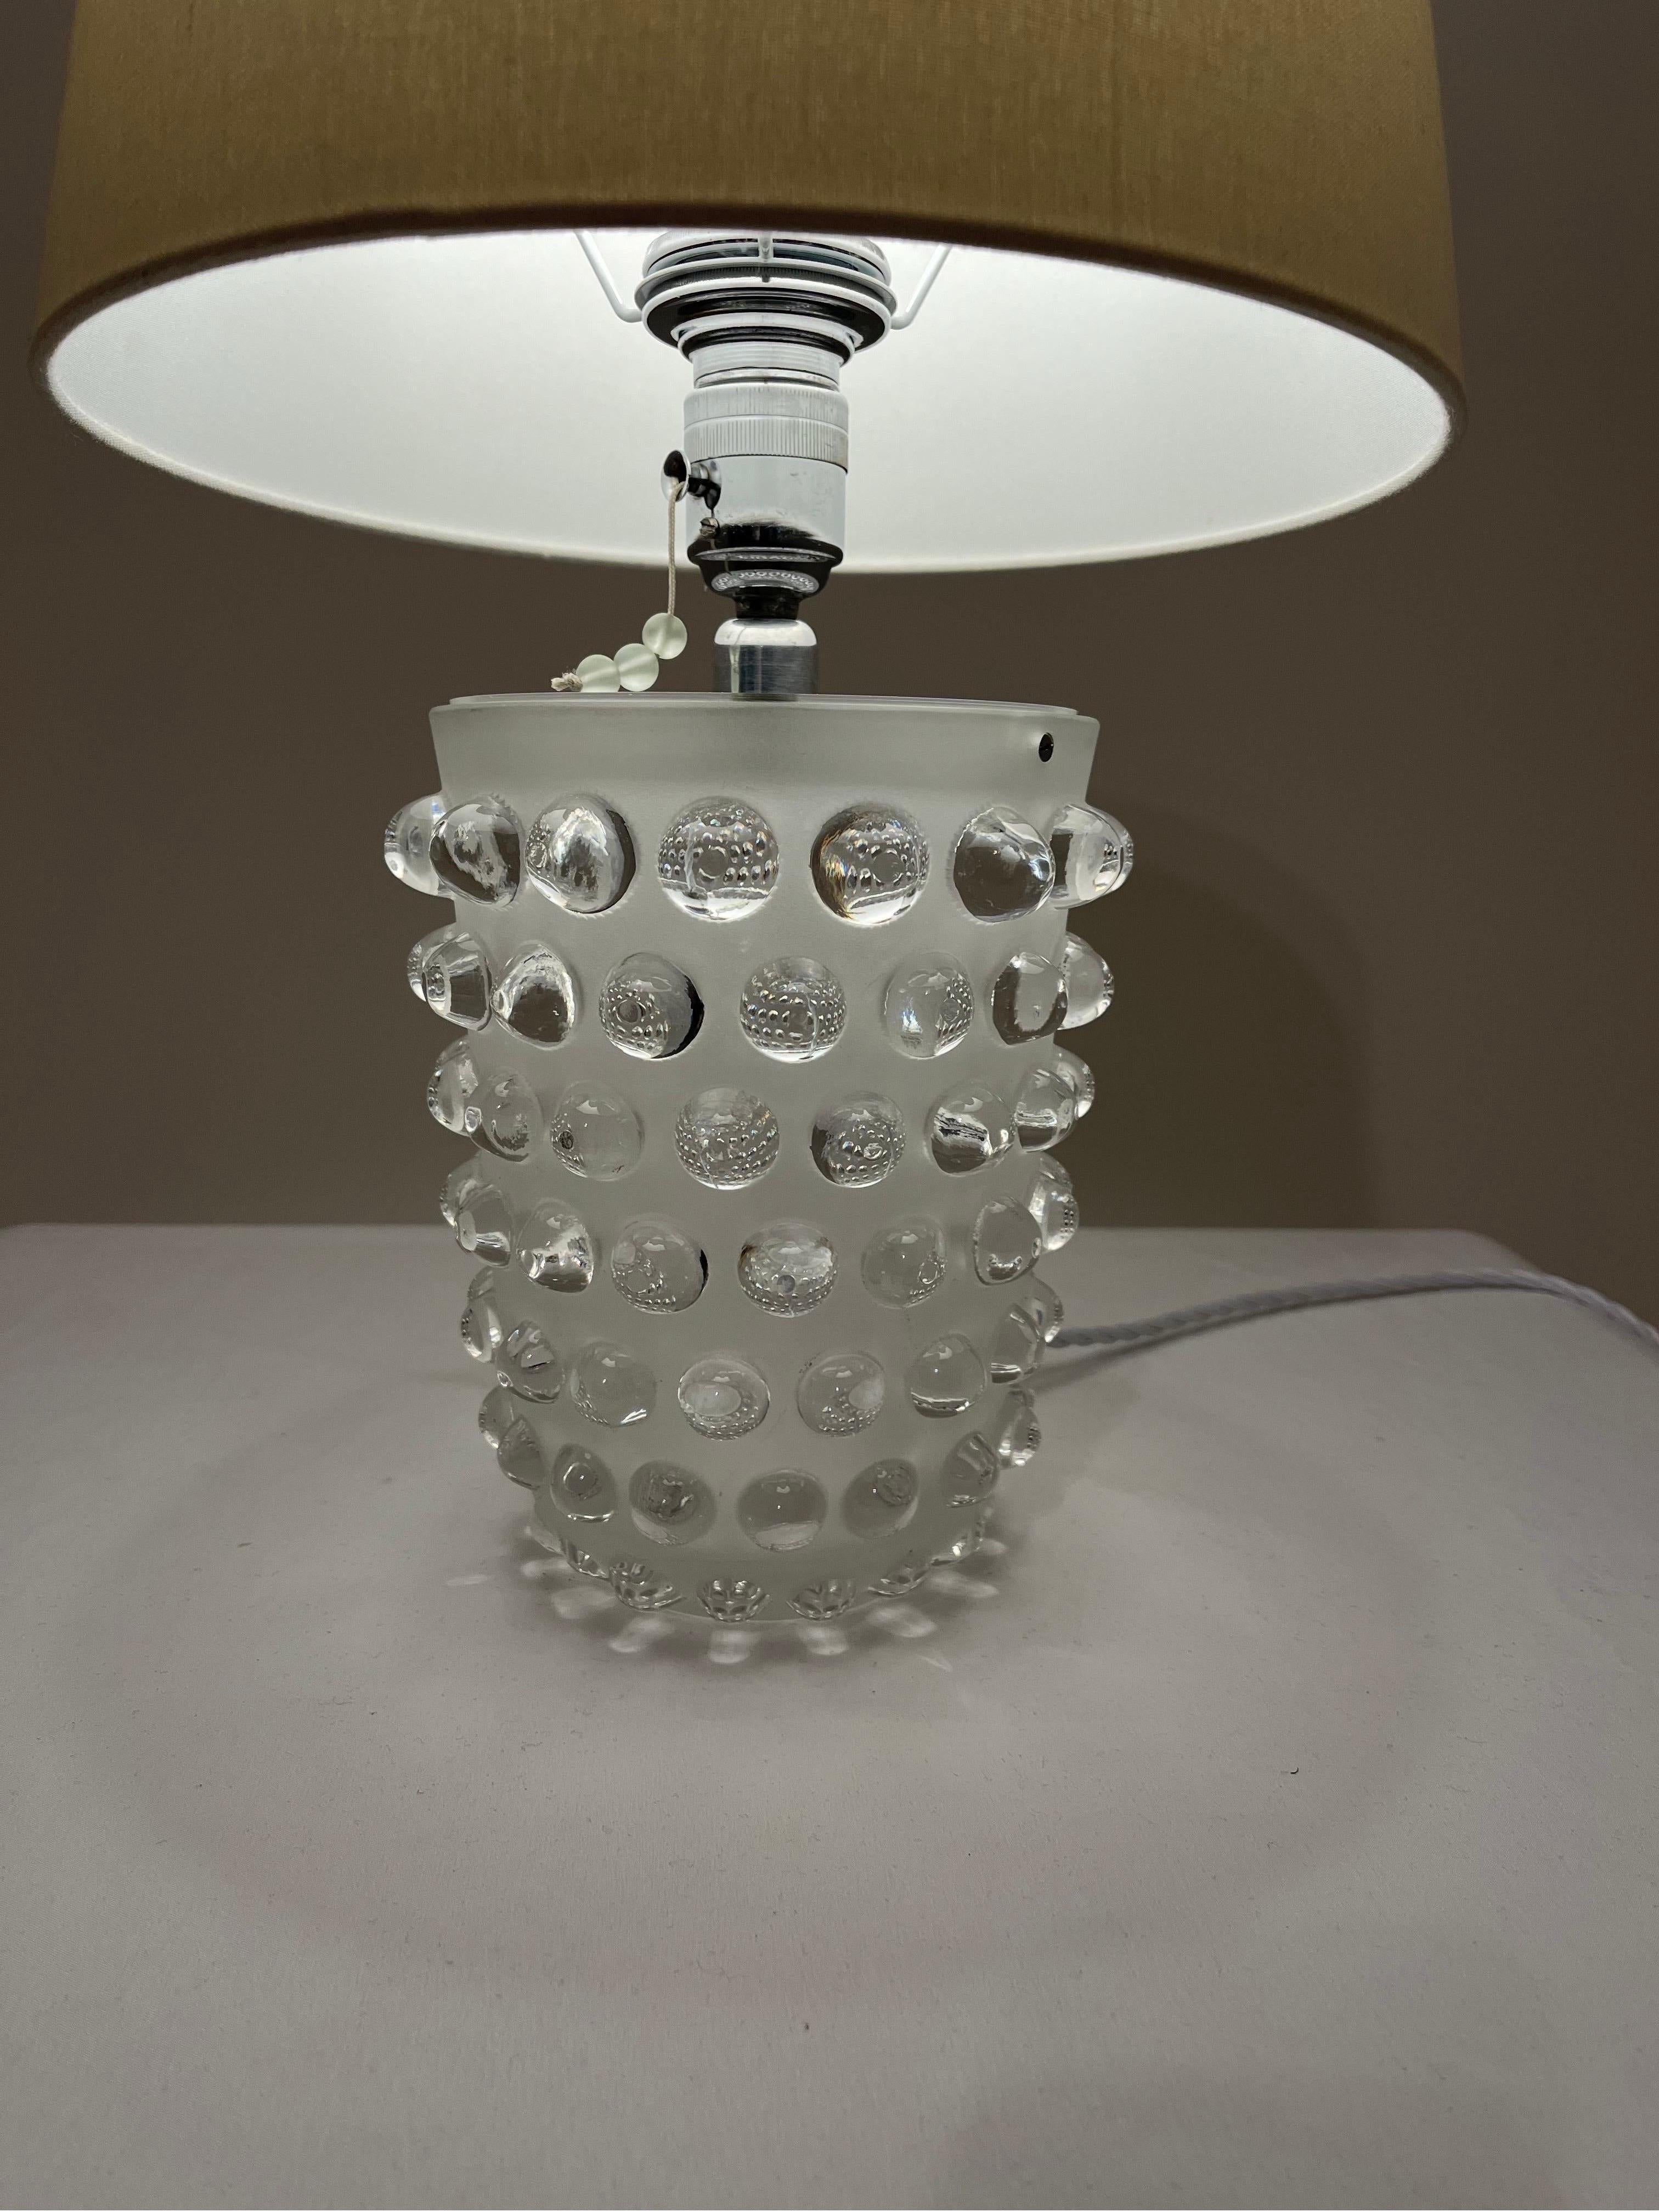 Original Lalique Mossi Vase 
Converted to table lamp
Pre 1977 signature 

Very nice conversion in excellent condition shown. Some scratches to base. 

